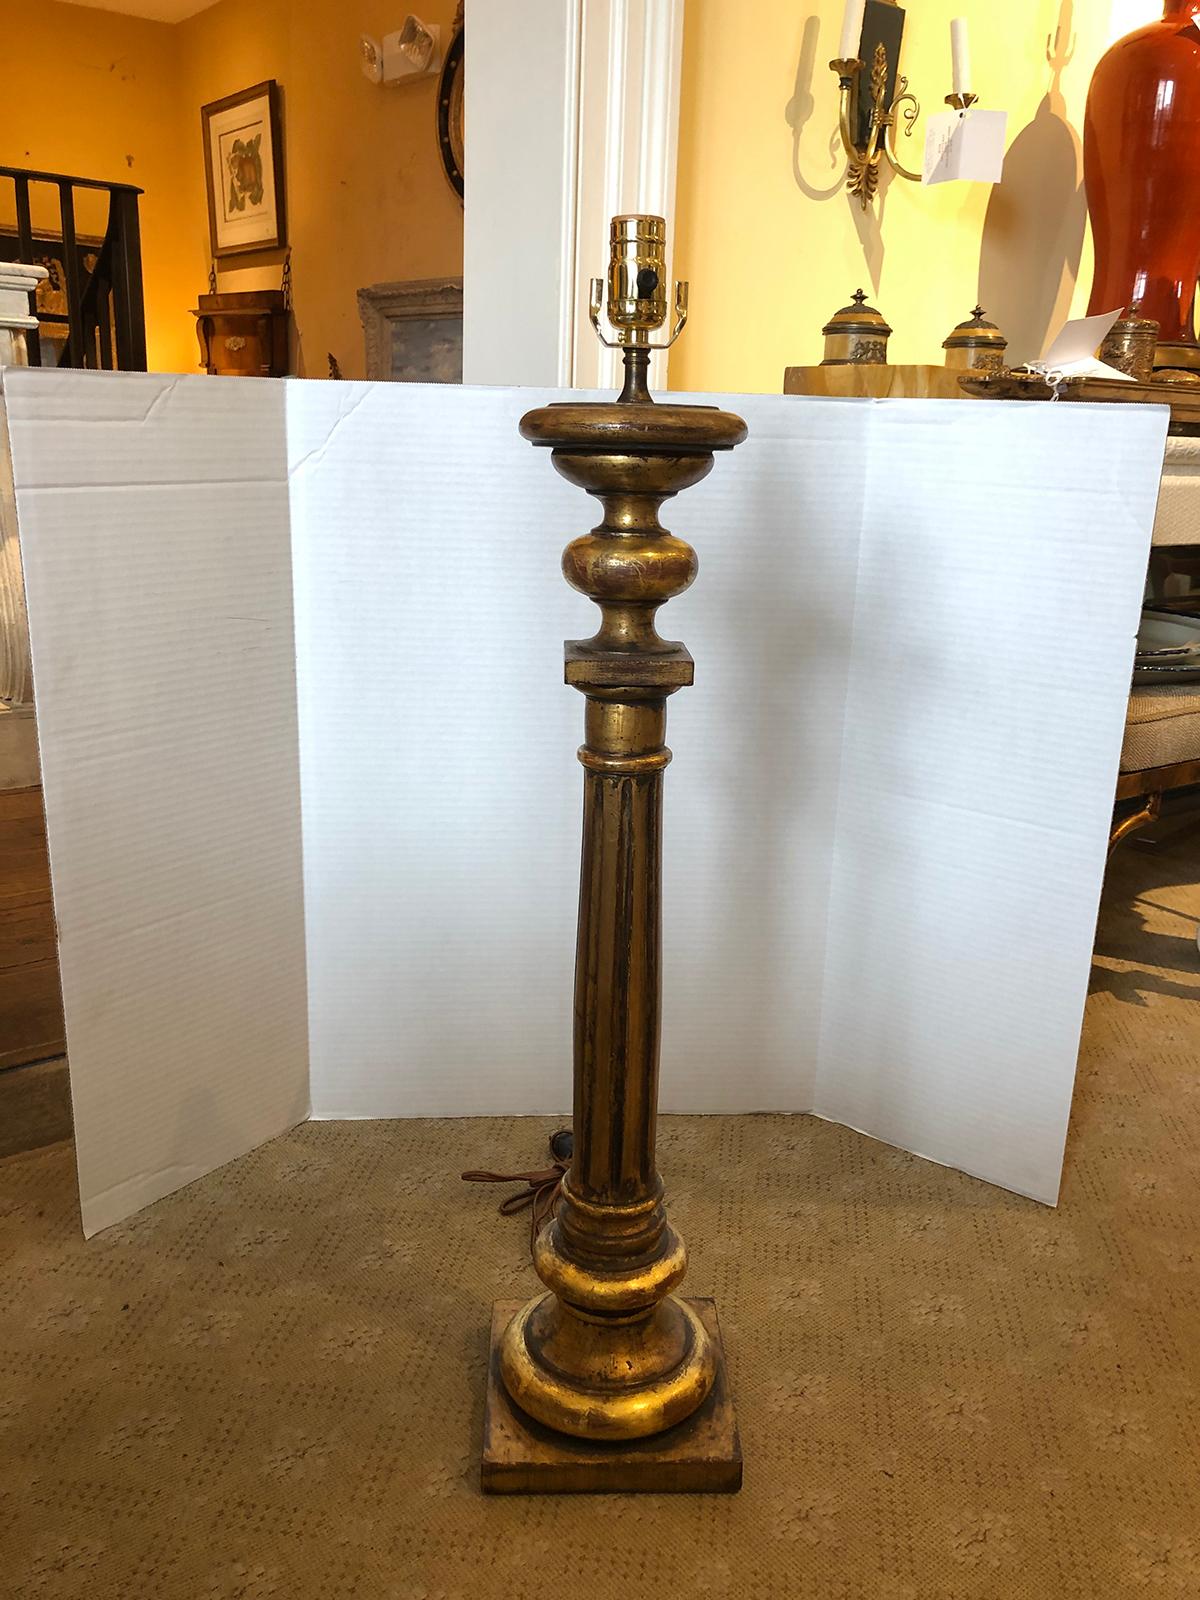 Early 20th Century Italian Neoclassical Giltwood Column Lamp For Sale 1